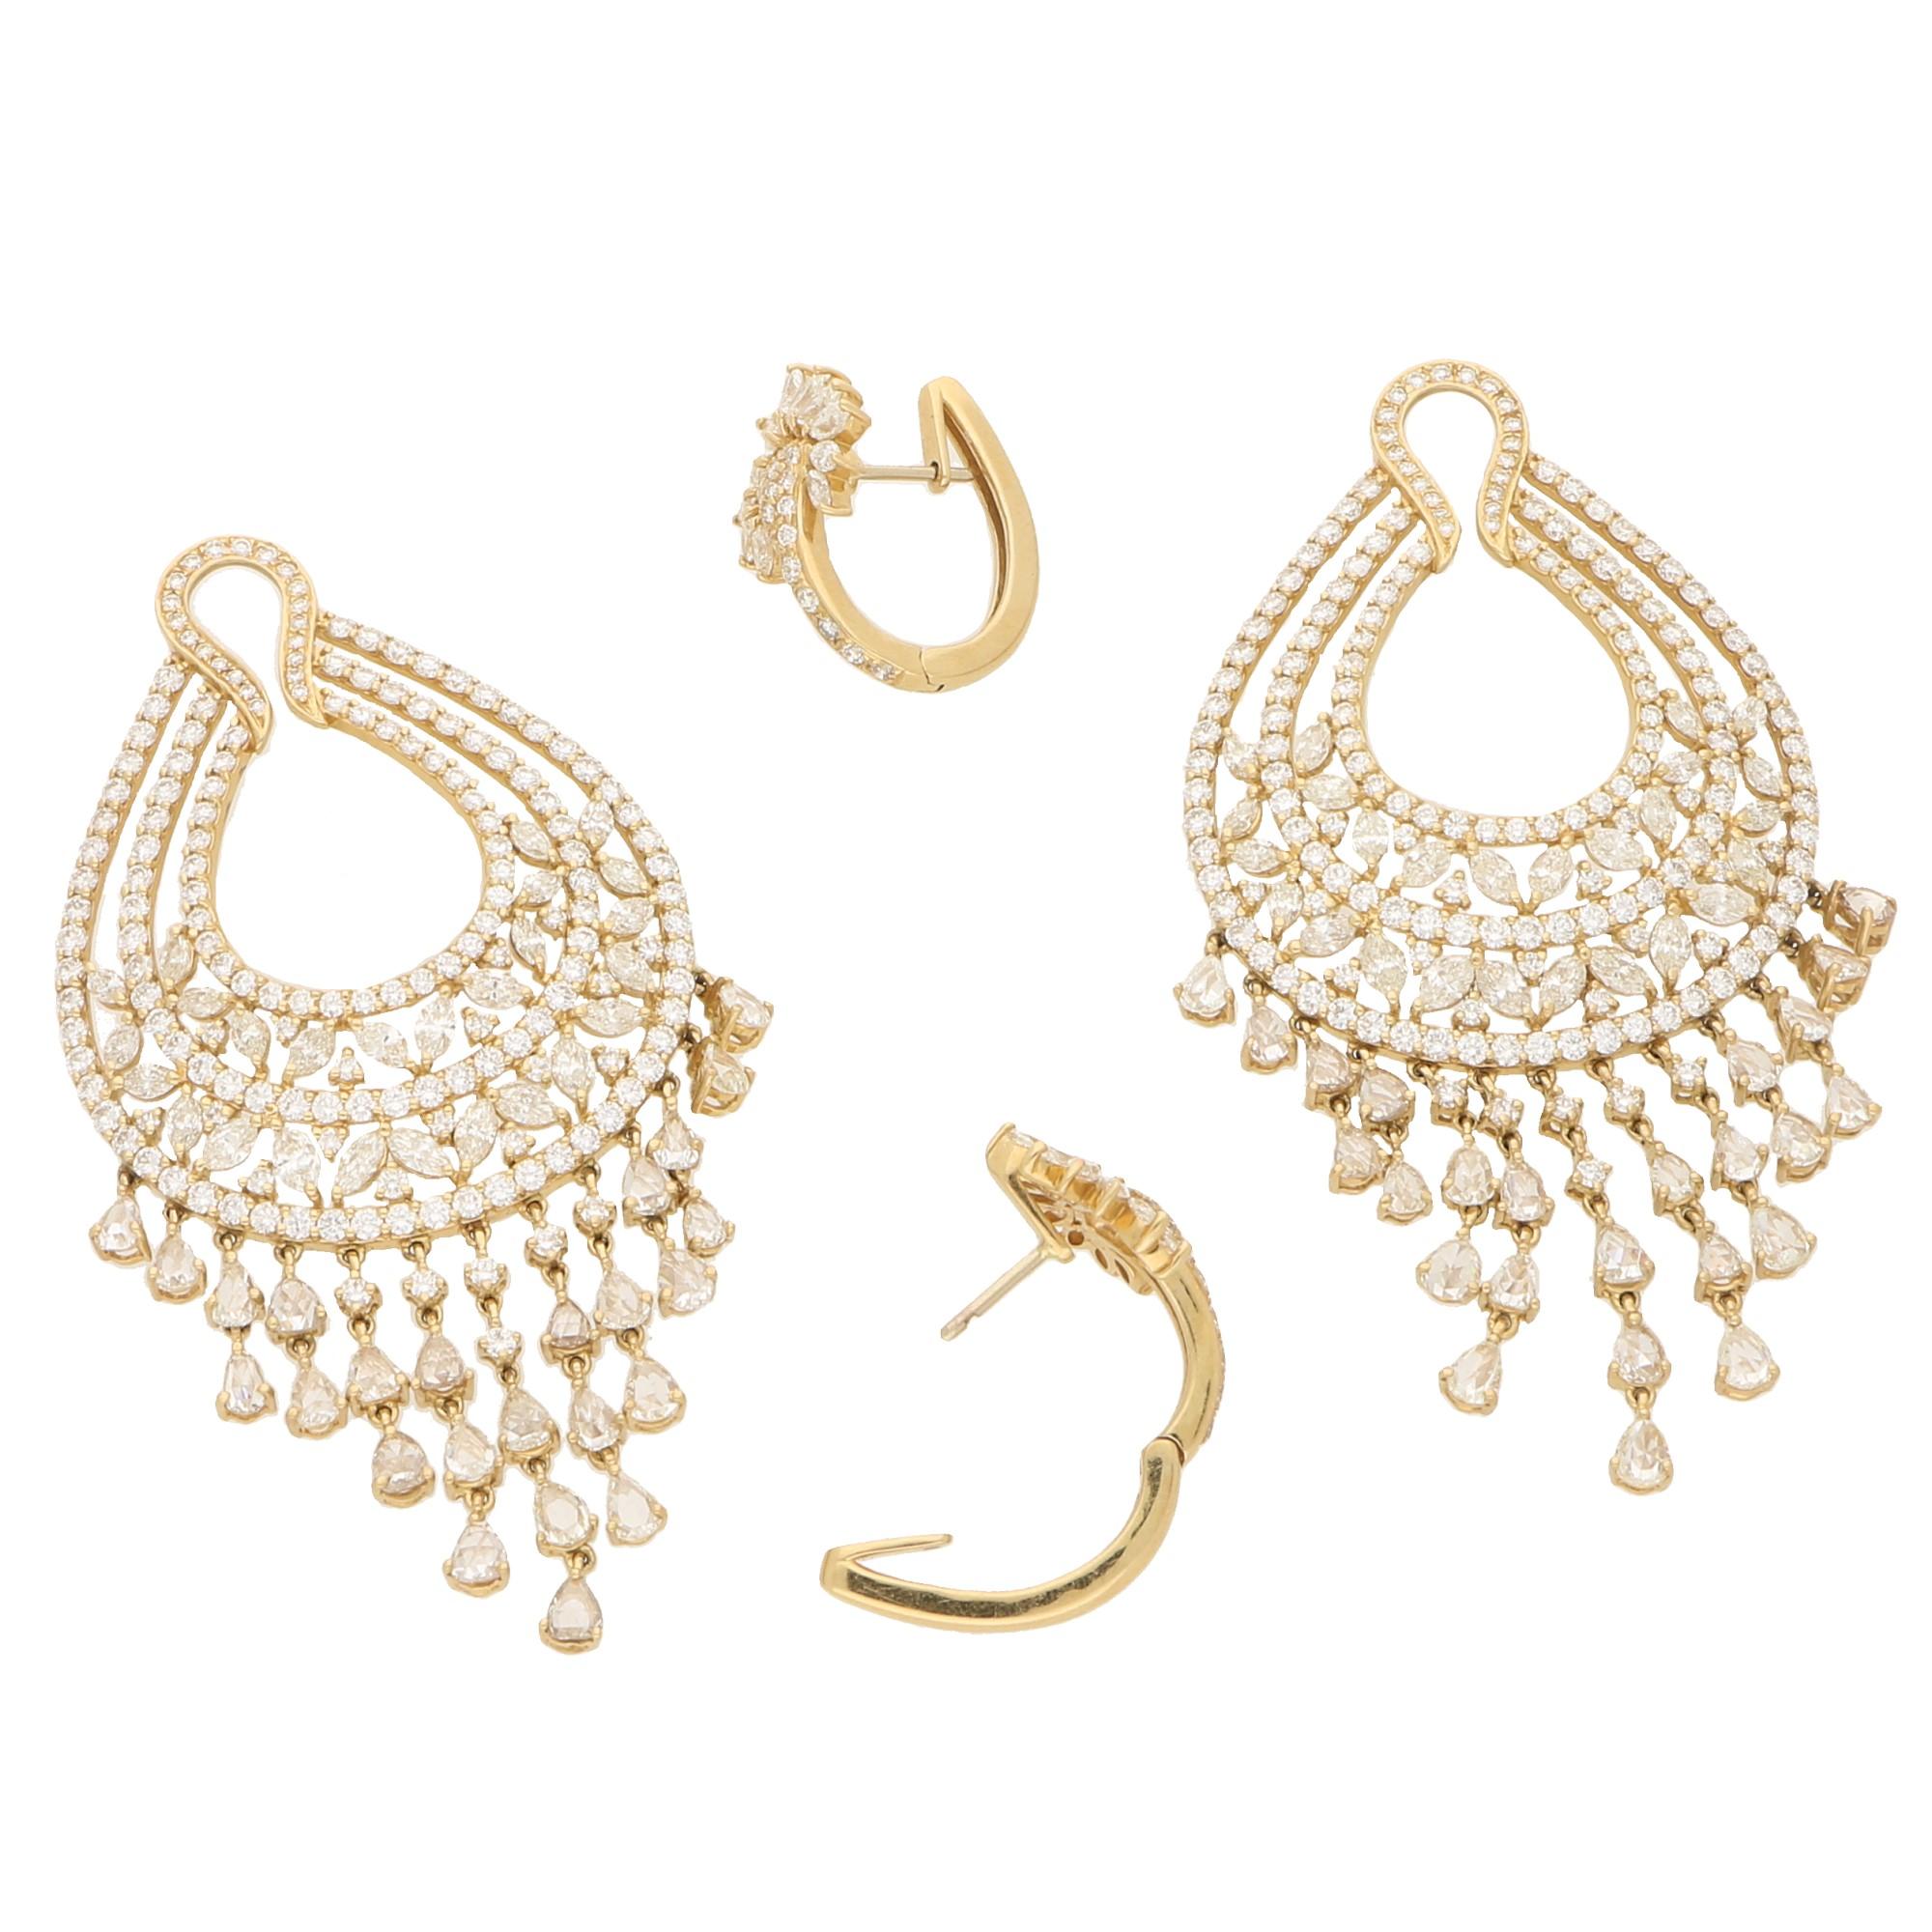 A gorgeous pair of convertible diamond chandelier tassel earrings set in 18 karat yellow gold. 

Each earring is composed of a lotus motif diamond hoop, from which hangs an openwork drop set with marquise brilliant-cut and round brilliant-cut